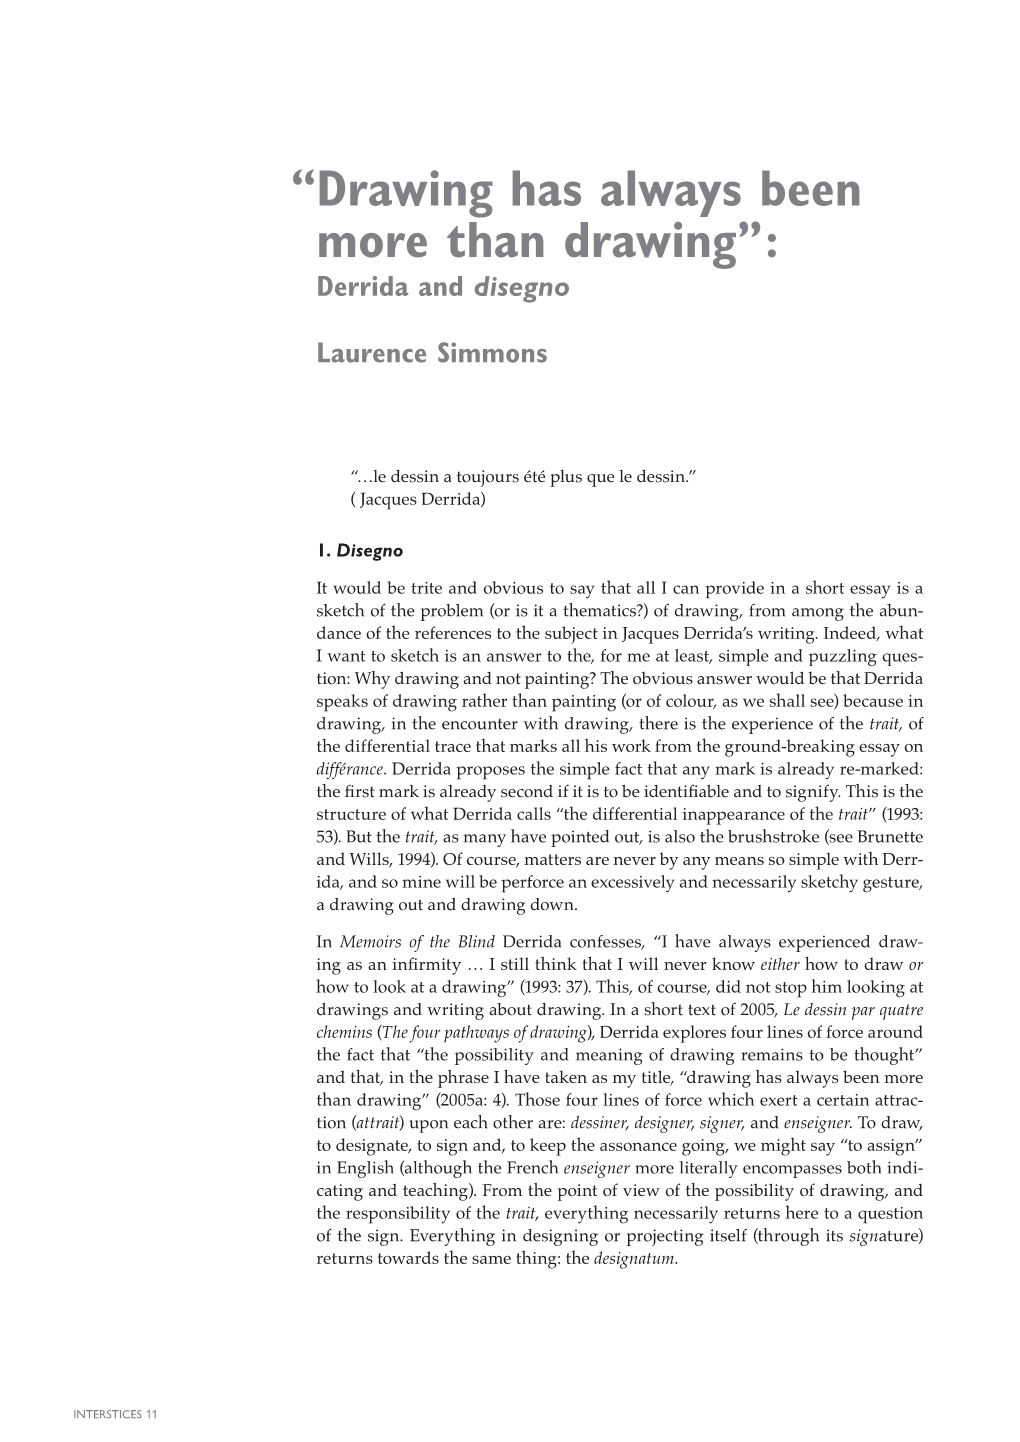 Drawing Has Always Been More Than Drawing” : Derrida and Disegno